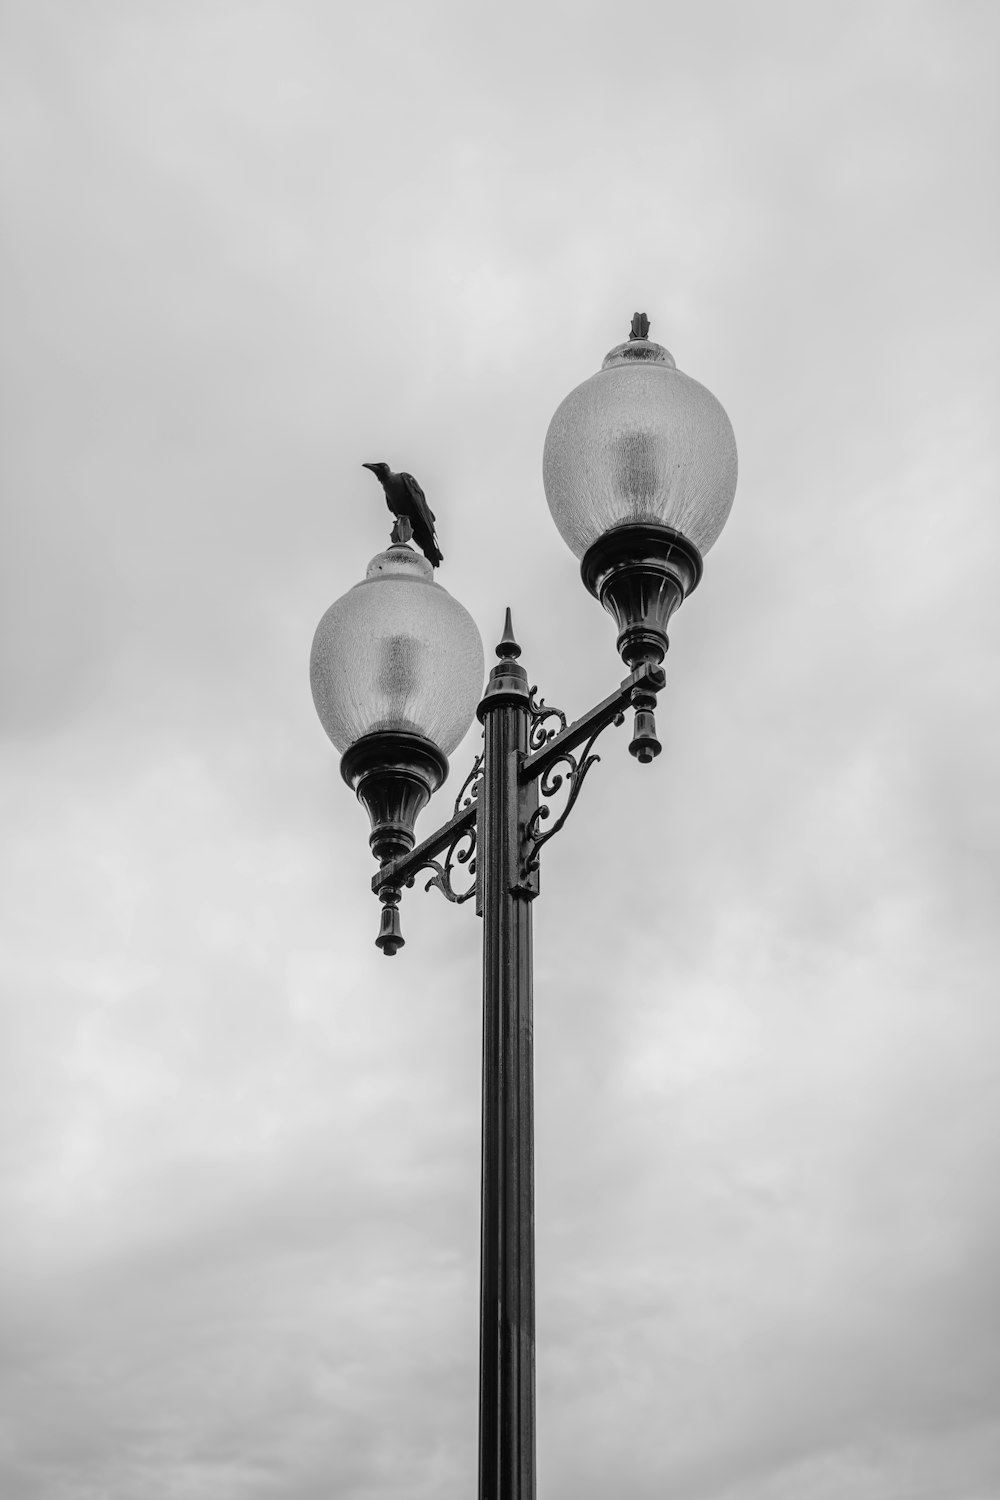 a bird sitting on a lamp post